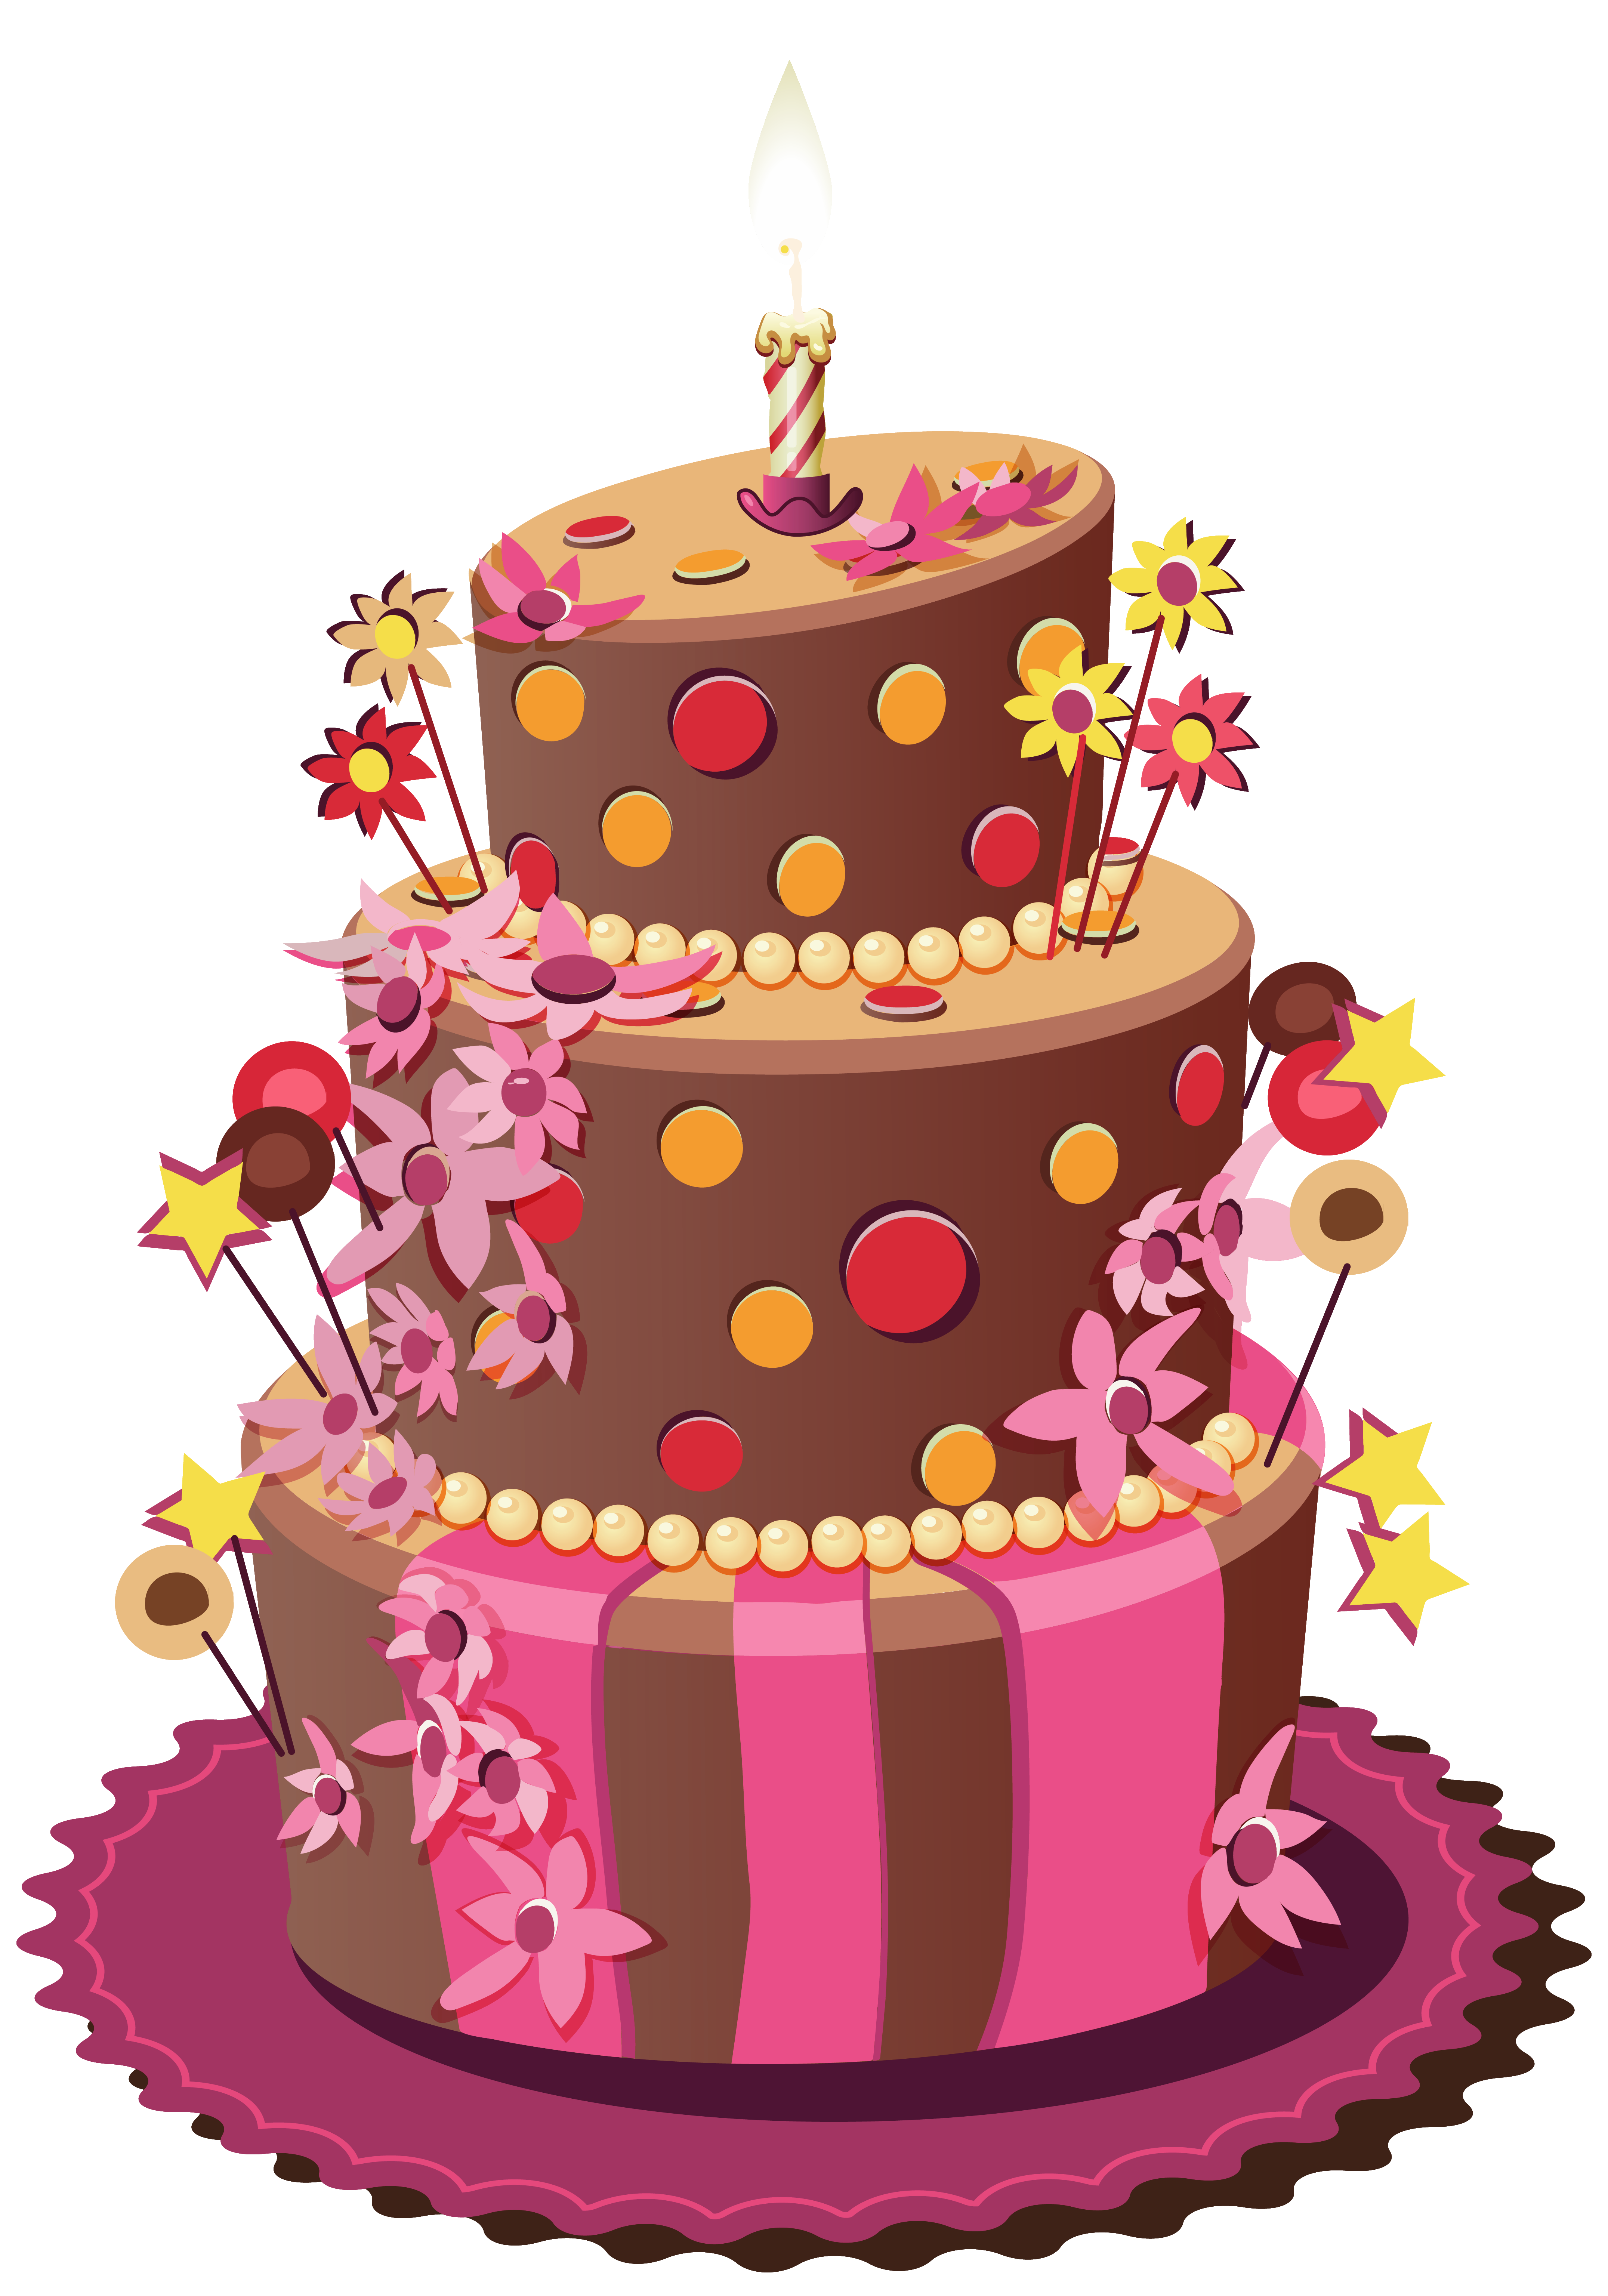 Birthday Cake PNG Clipart Image | Gallery Yopriceville - High-Quality